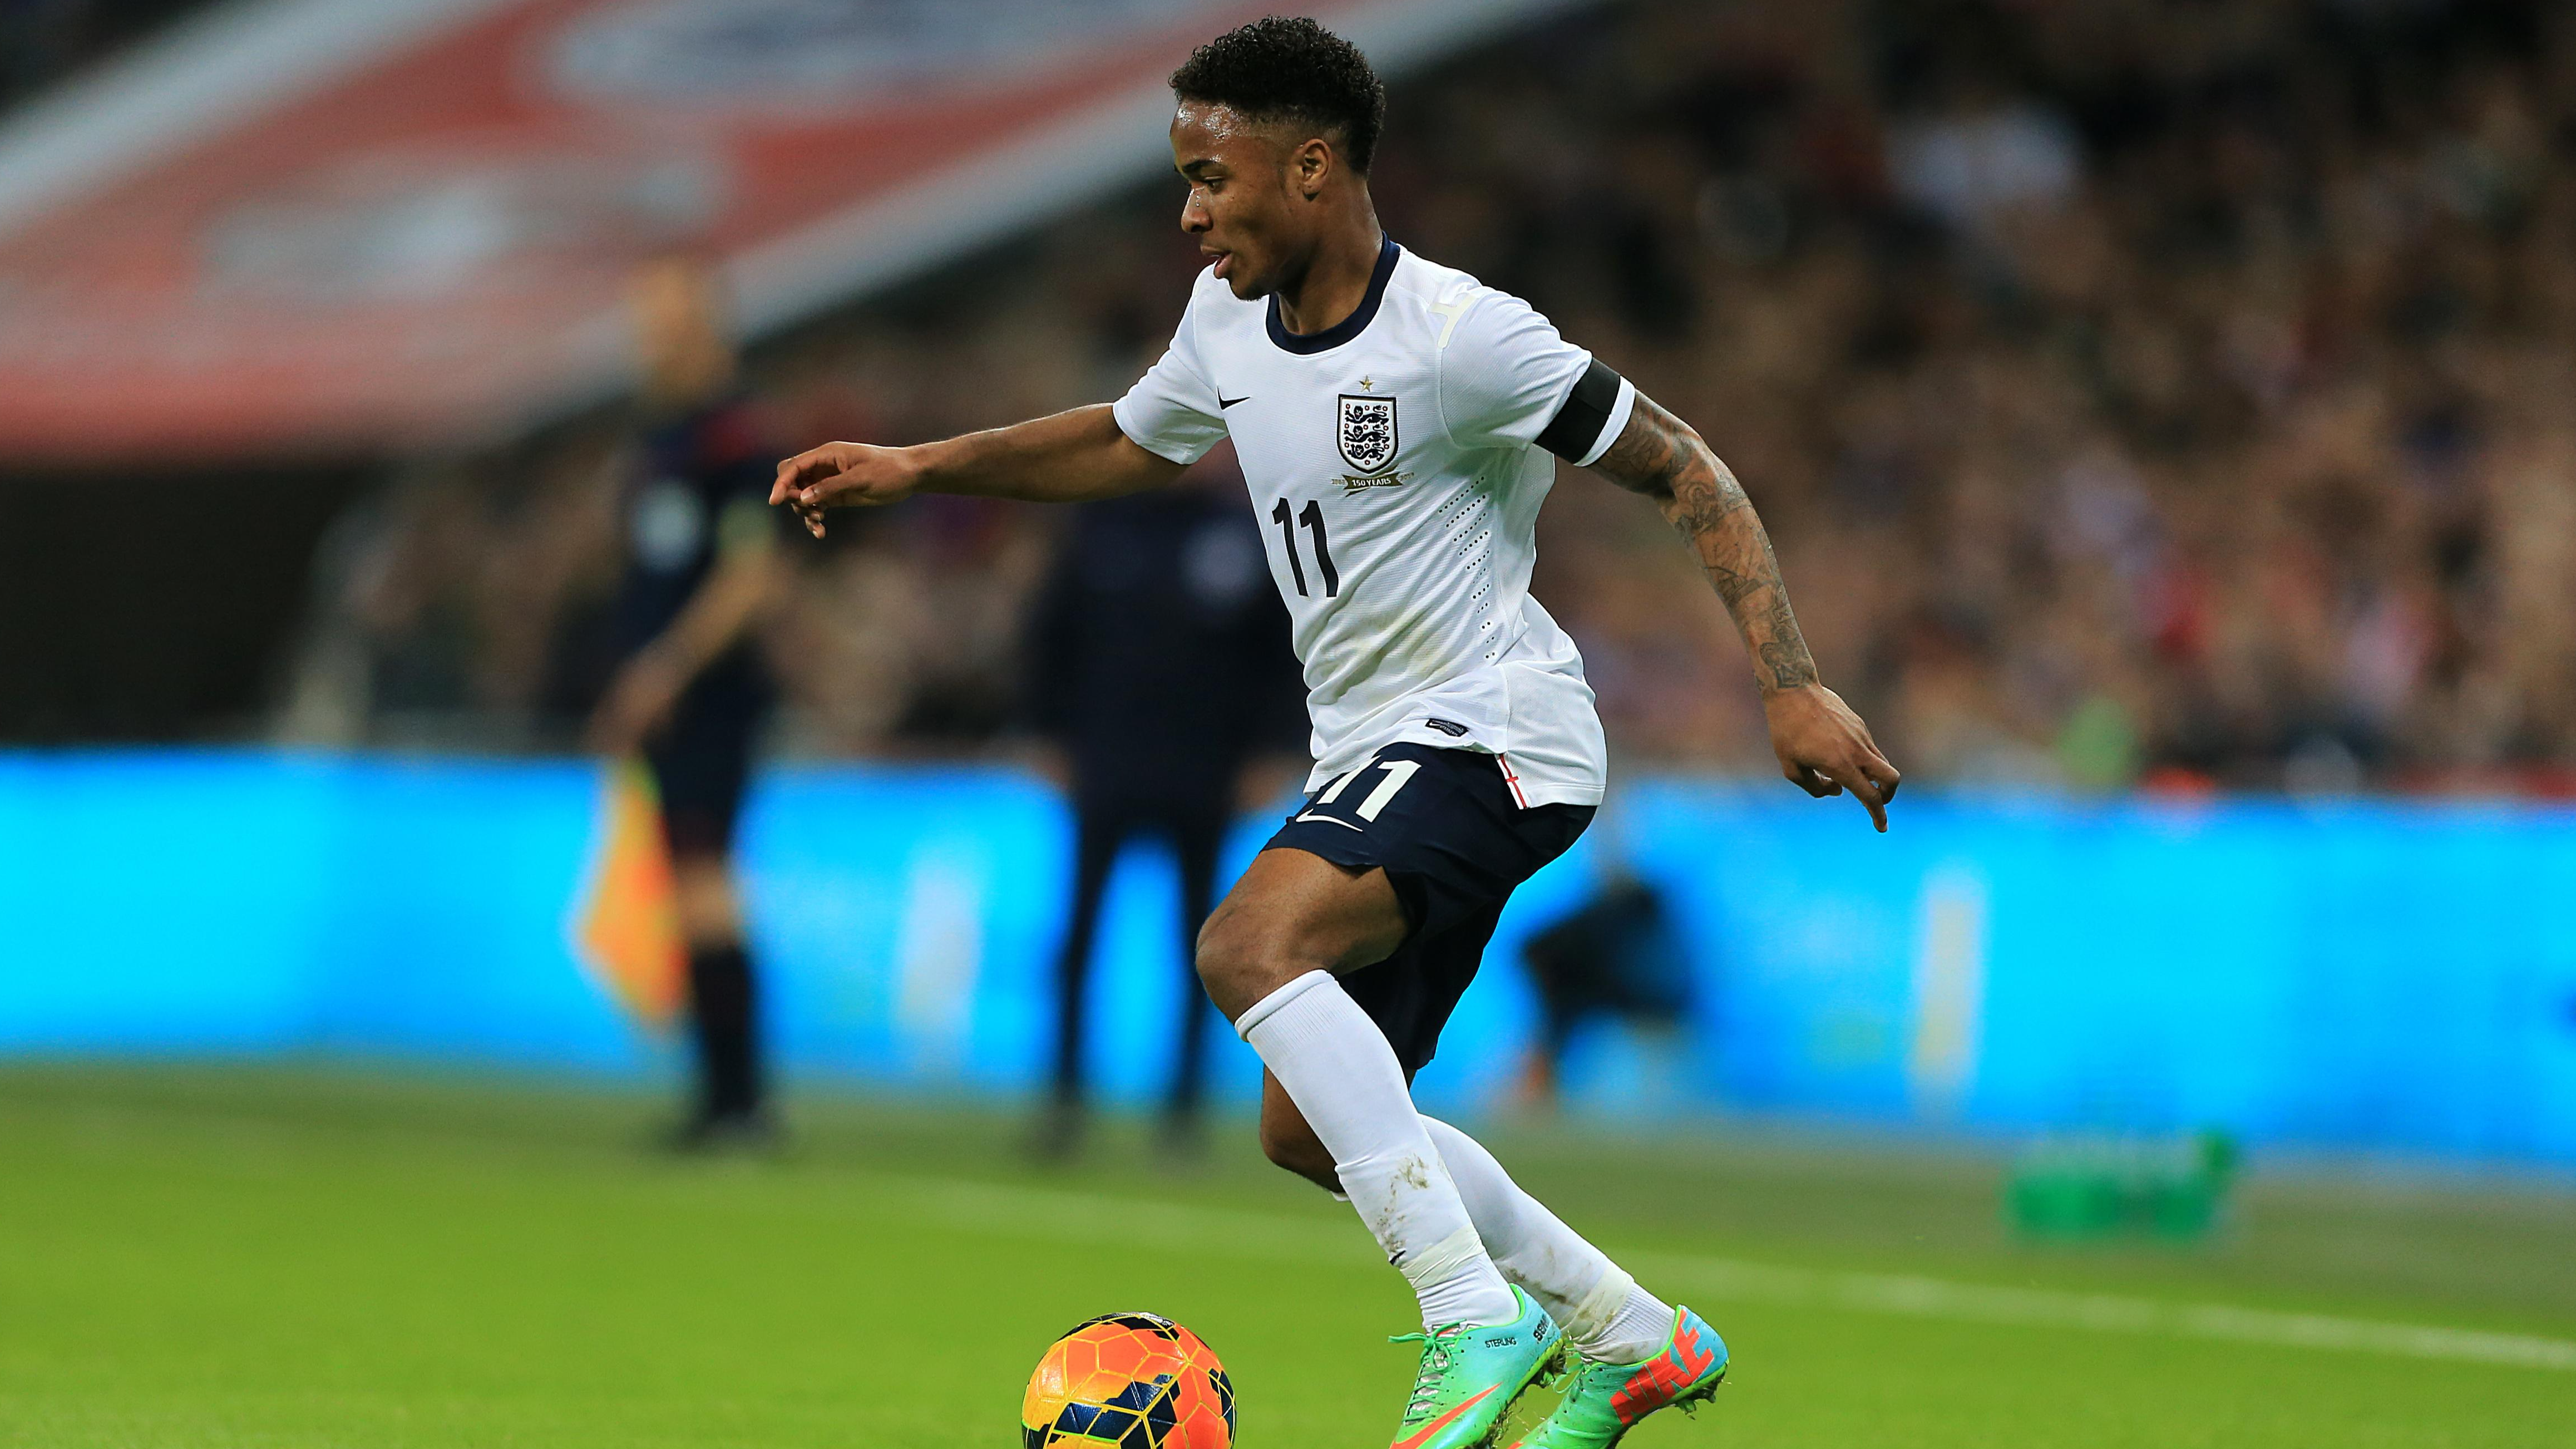 Sterling to Madrid gains traction once again